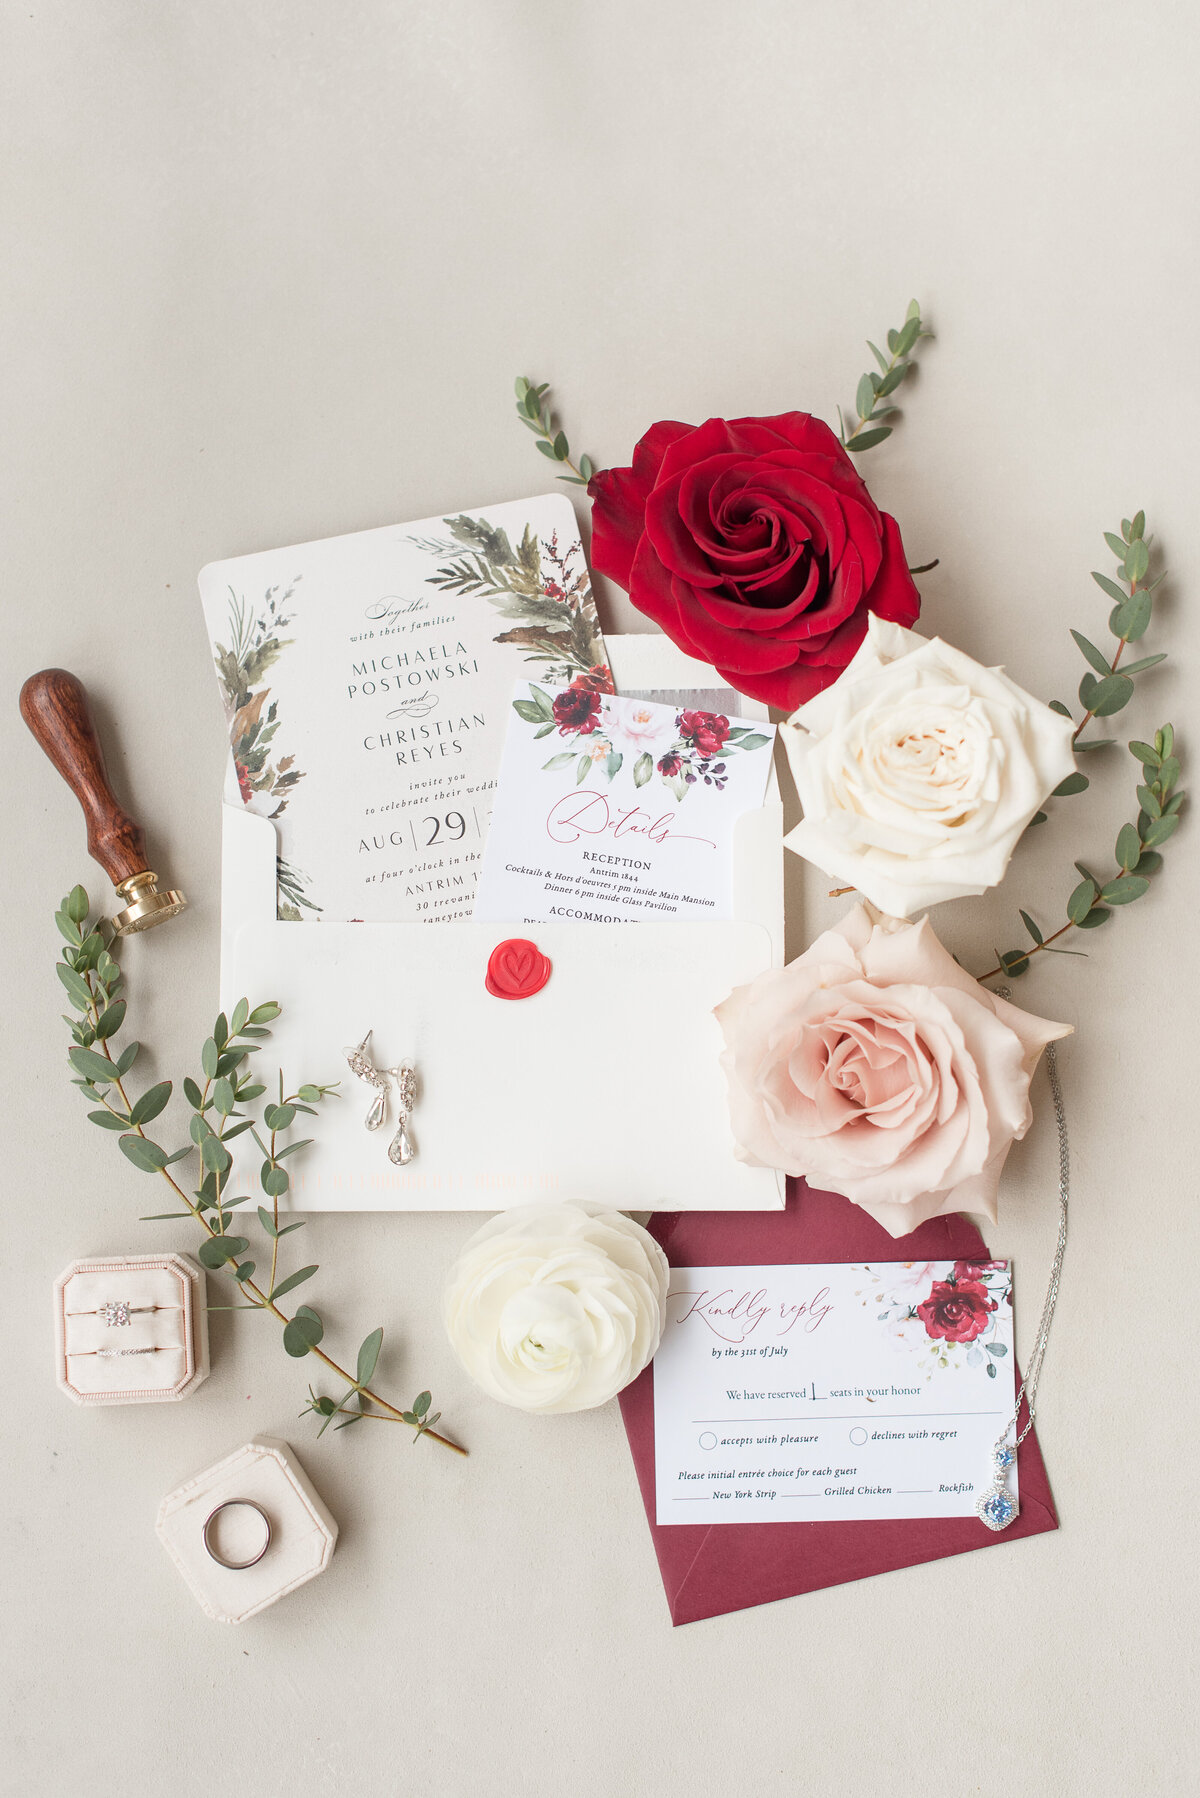 Couples' wedding invitation and wedding rings in boxes displayed on table with roses and eucalyptus.